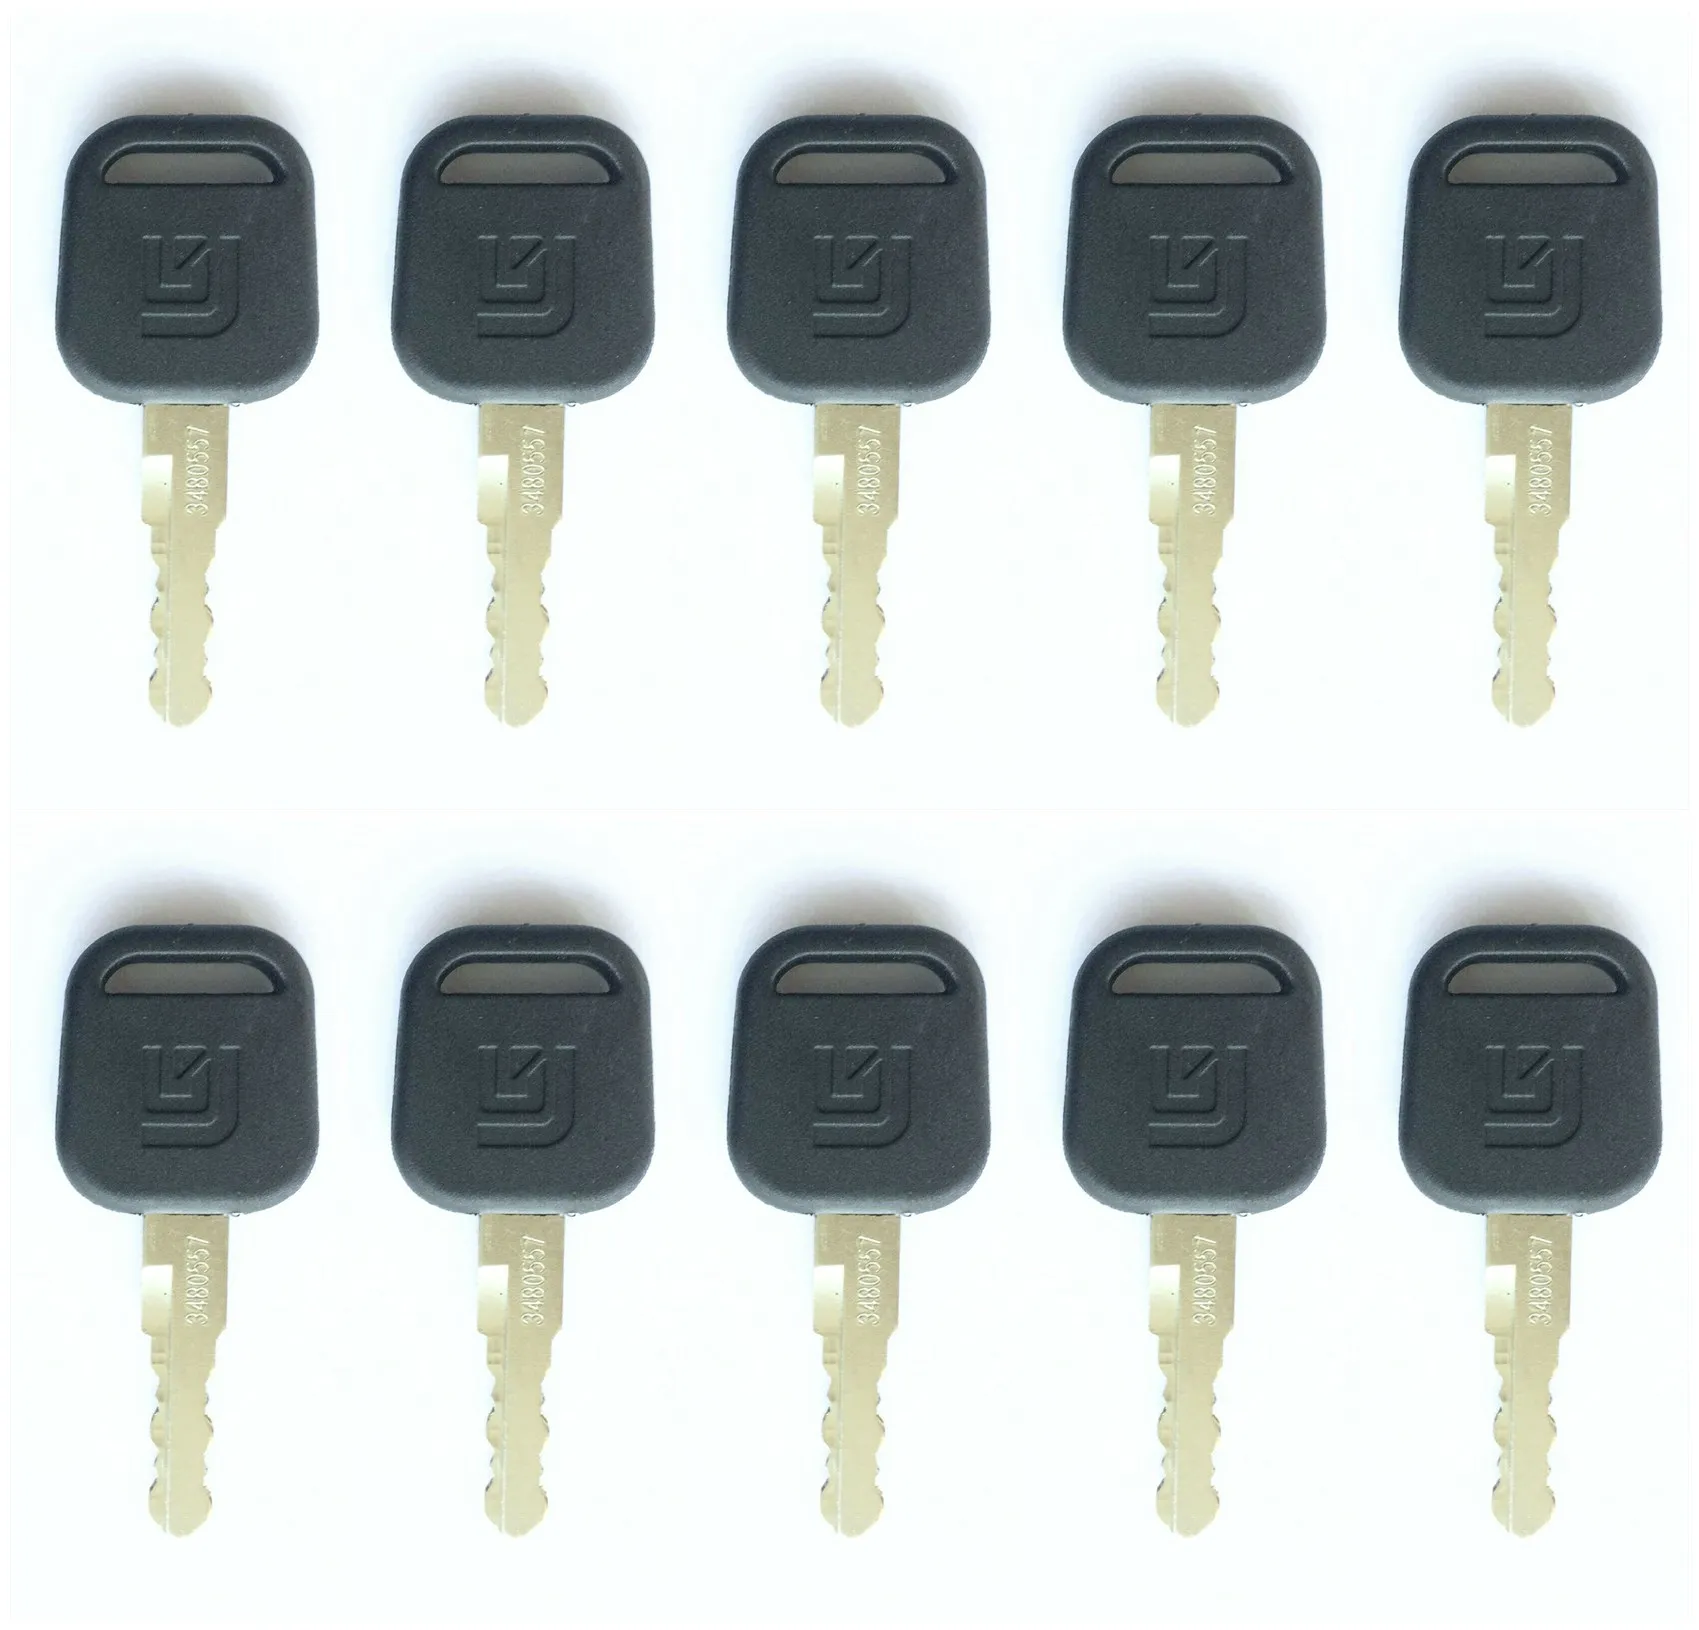 10key For Liugong Excavator and Heavy Equipment Ignition Keys 34B0557 diesel glow plugs Spark Plugs & Ignition Systems